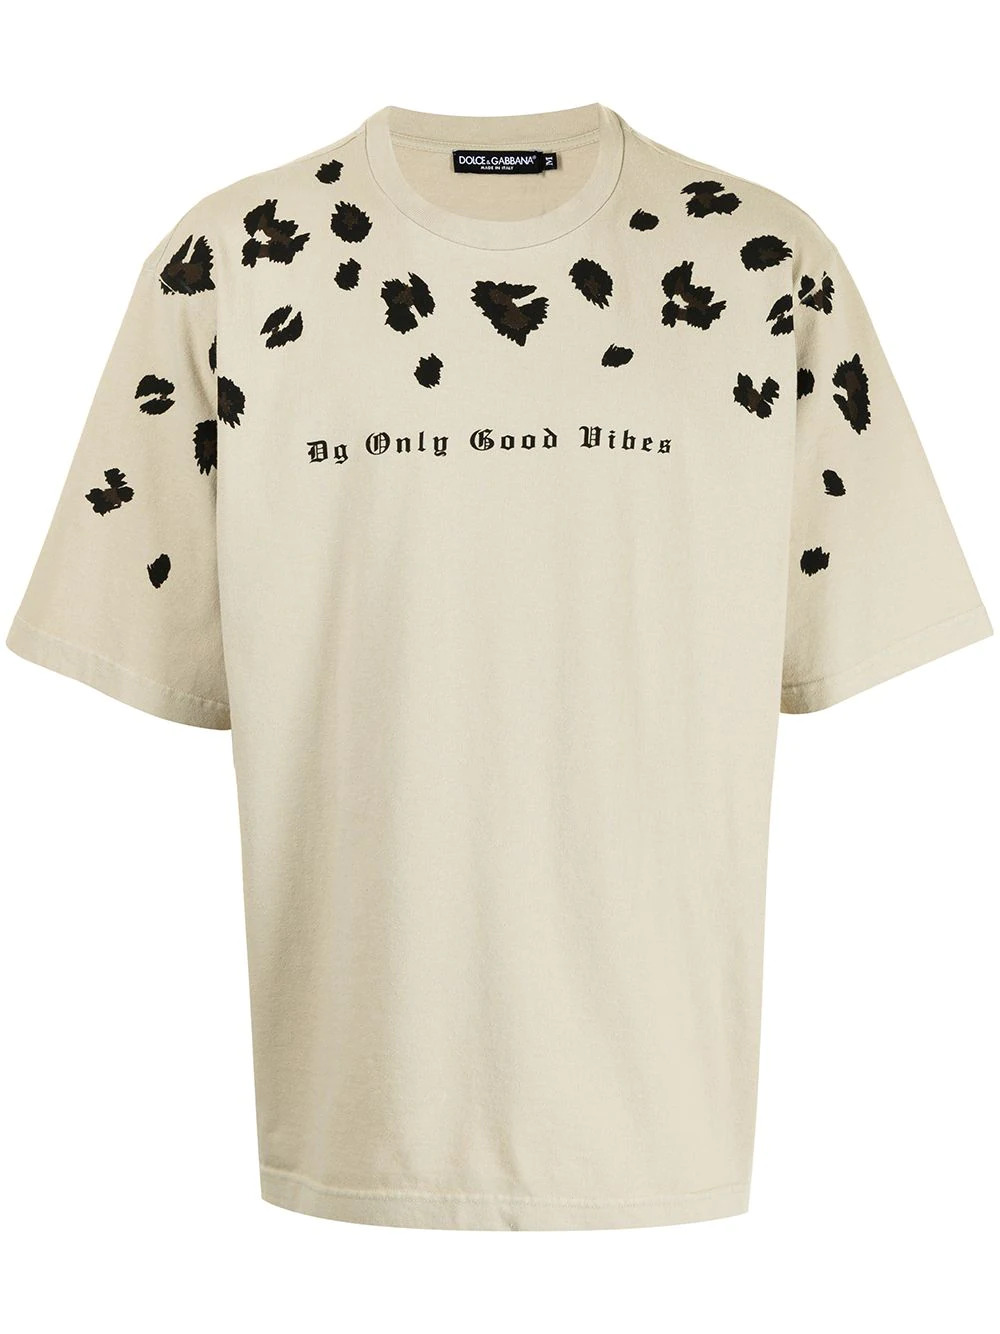 "Only Good Vibes" Baumwoll-T-Shirt in Beige